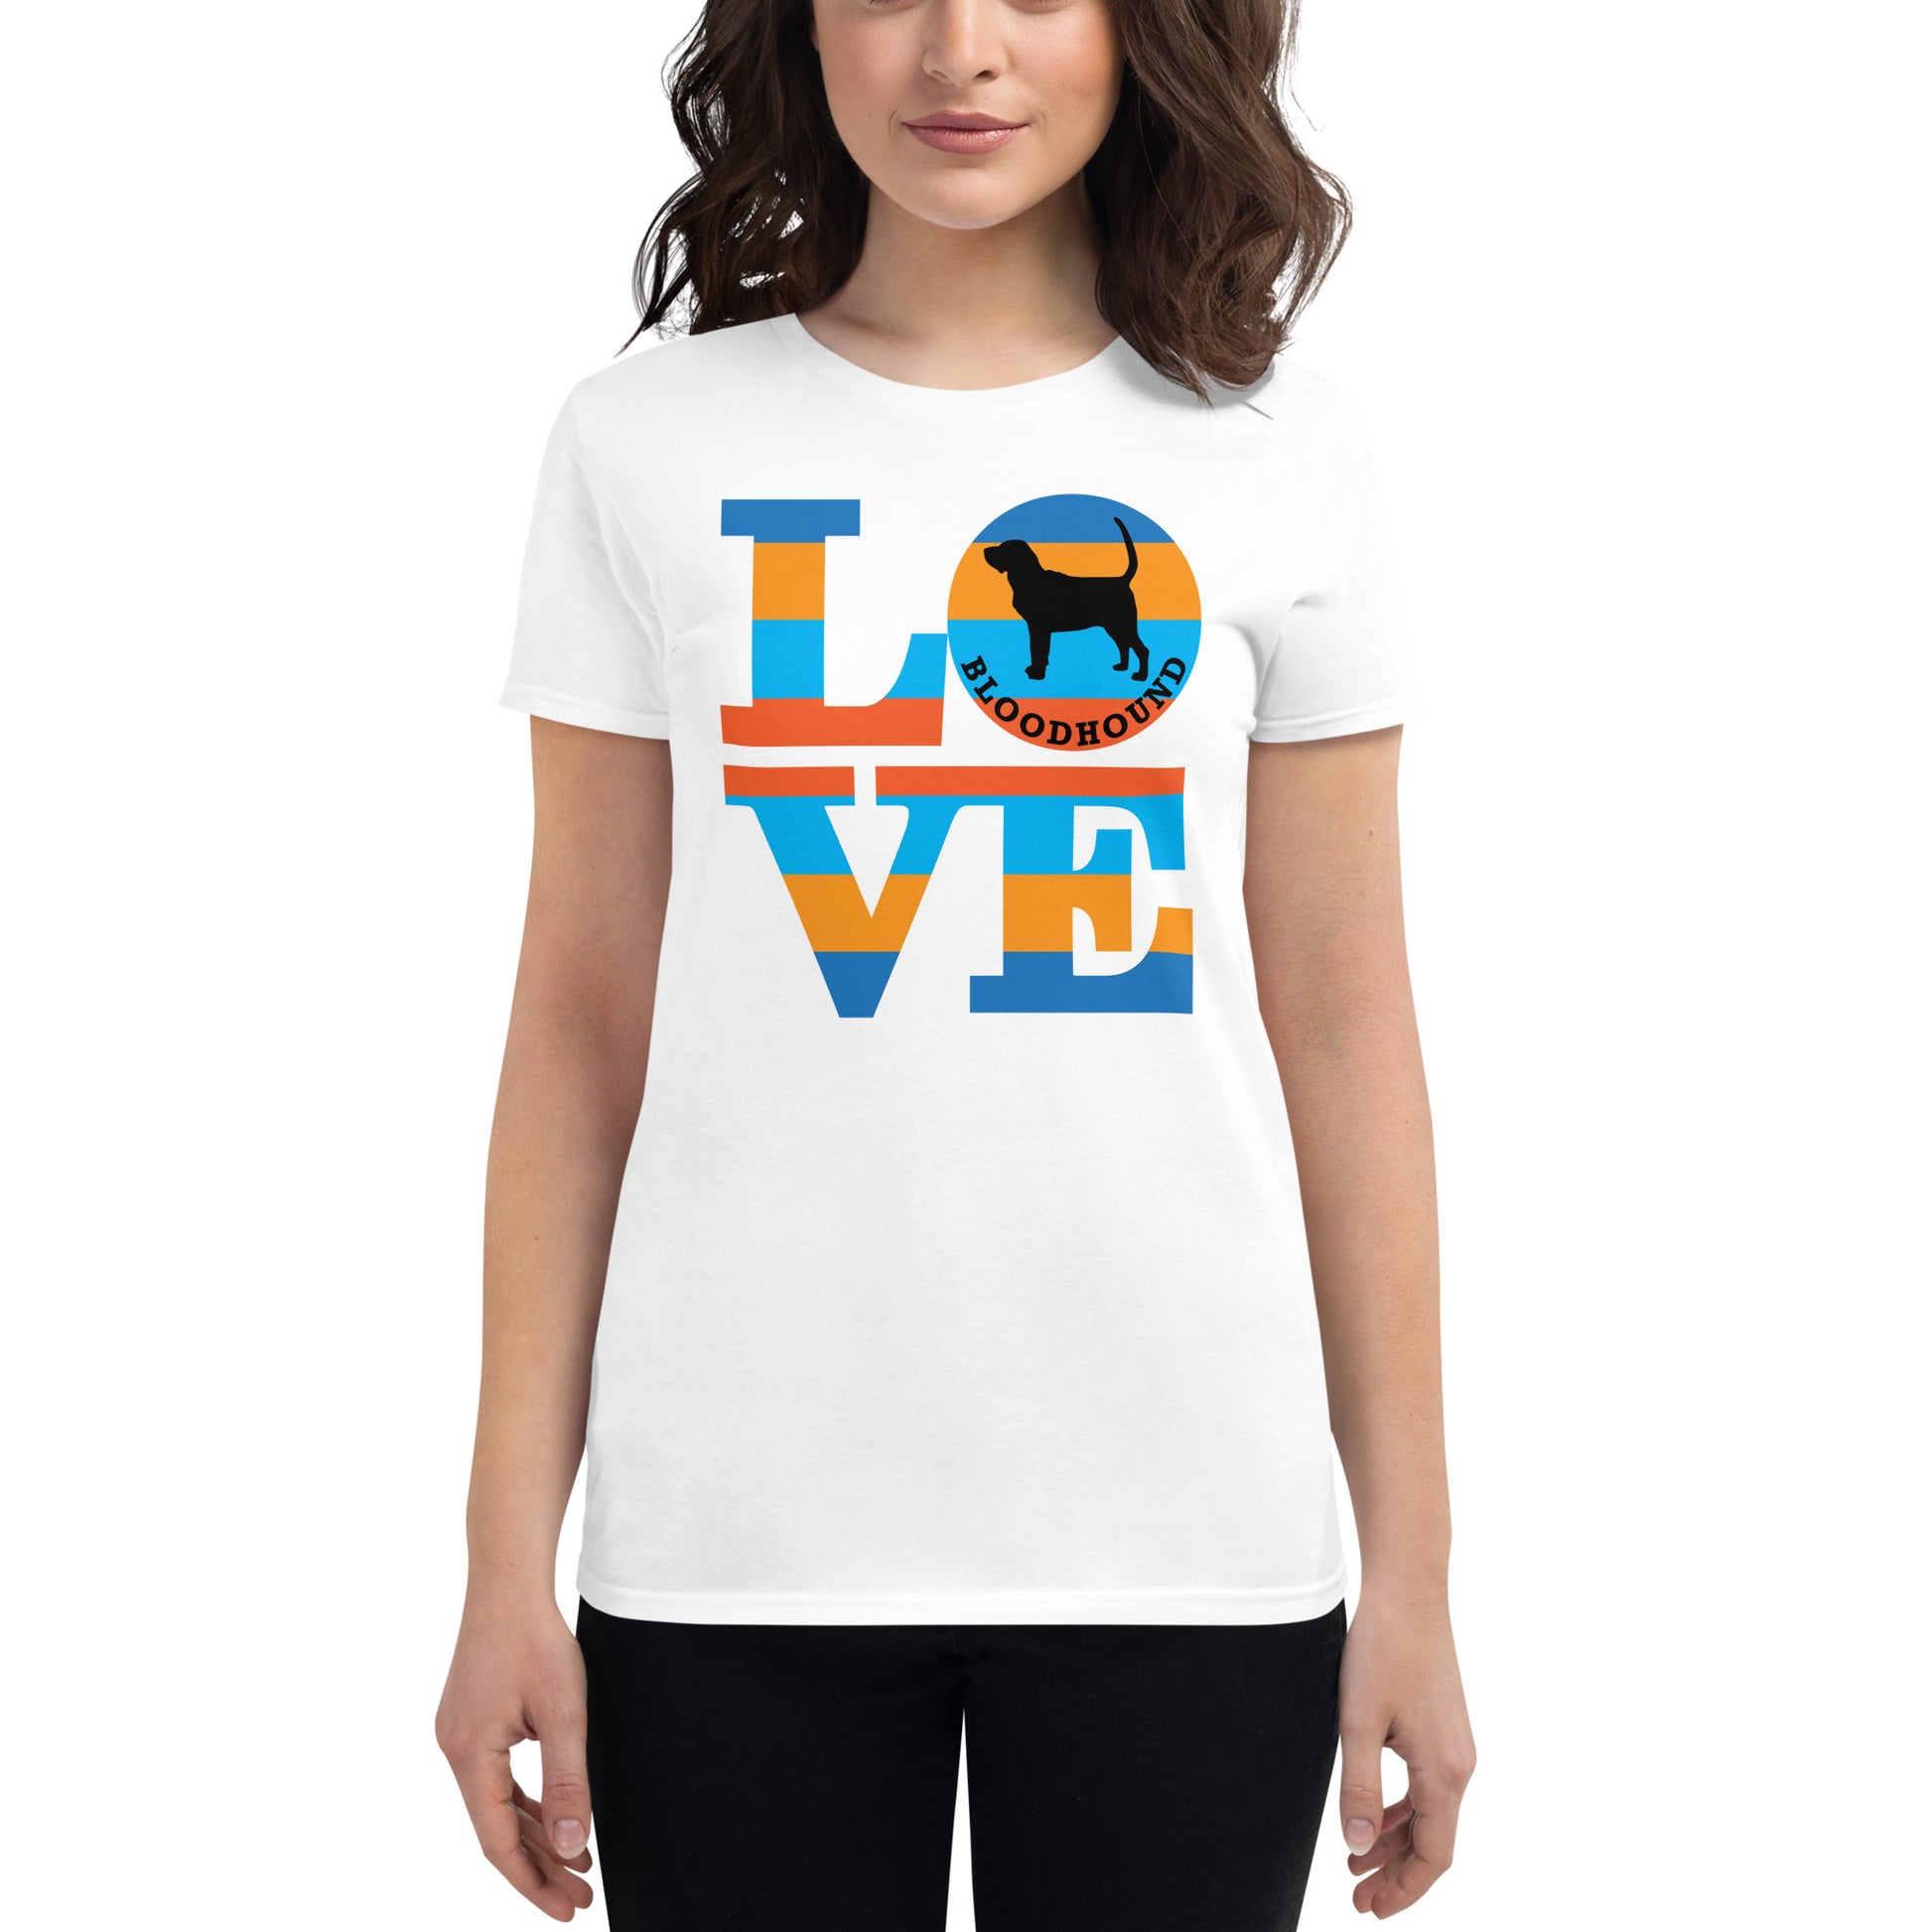 Bloodhound Love women’s white t-shirt by Dog Artistry.